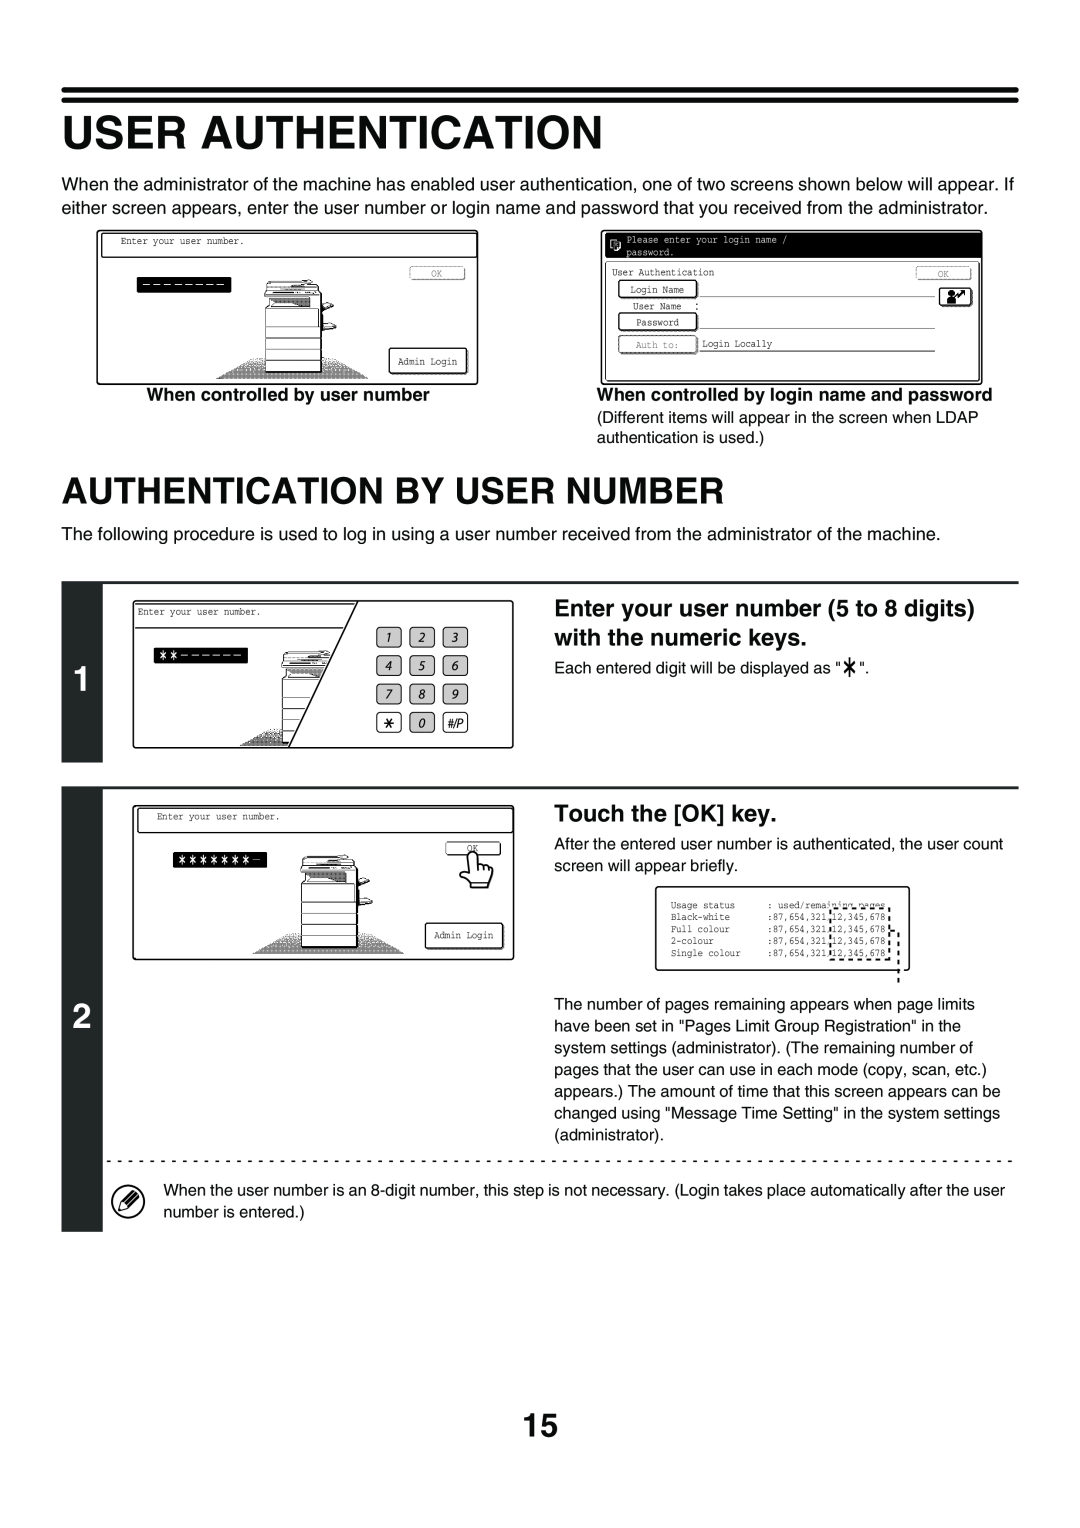 Sharp MX-3500N User Authentication, Authentication By User Number, Enter your user number 5 to 8 digits, Touch the OK key 